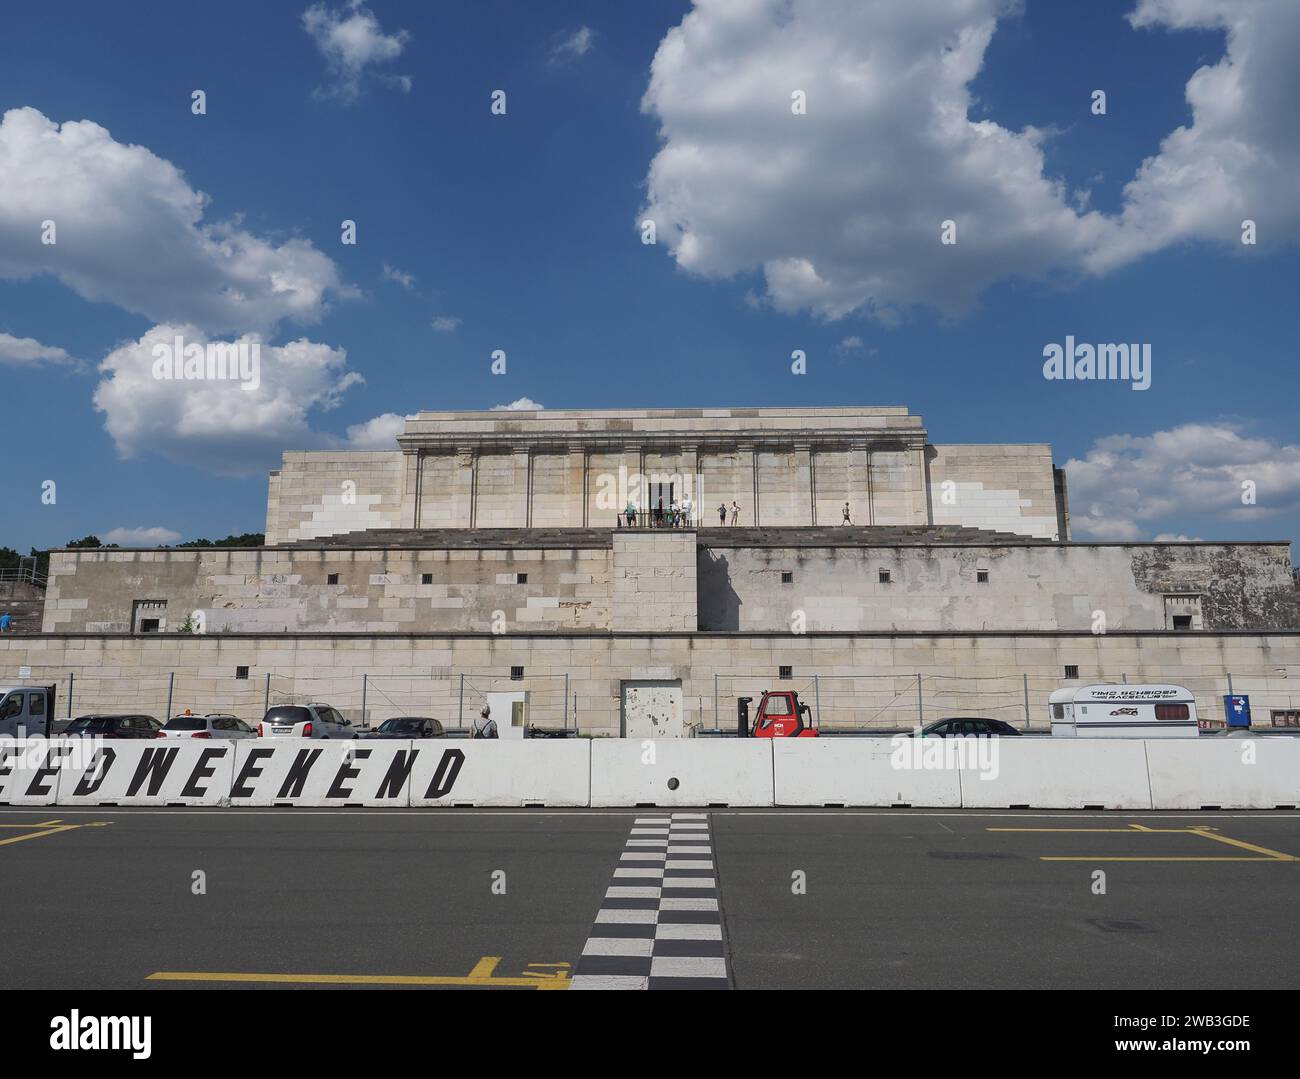 NUERNBERG, GERMANY - CIRCA JUNE 2022: Zeppelinfeld Translation Zeppelin Field Tribune Designed By Architect Albert Speer As Part Of The Nazi Party Ral Stock Photo